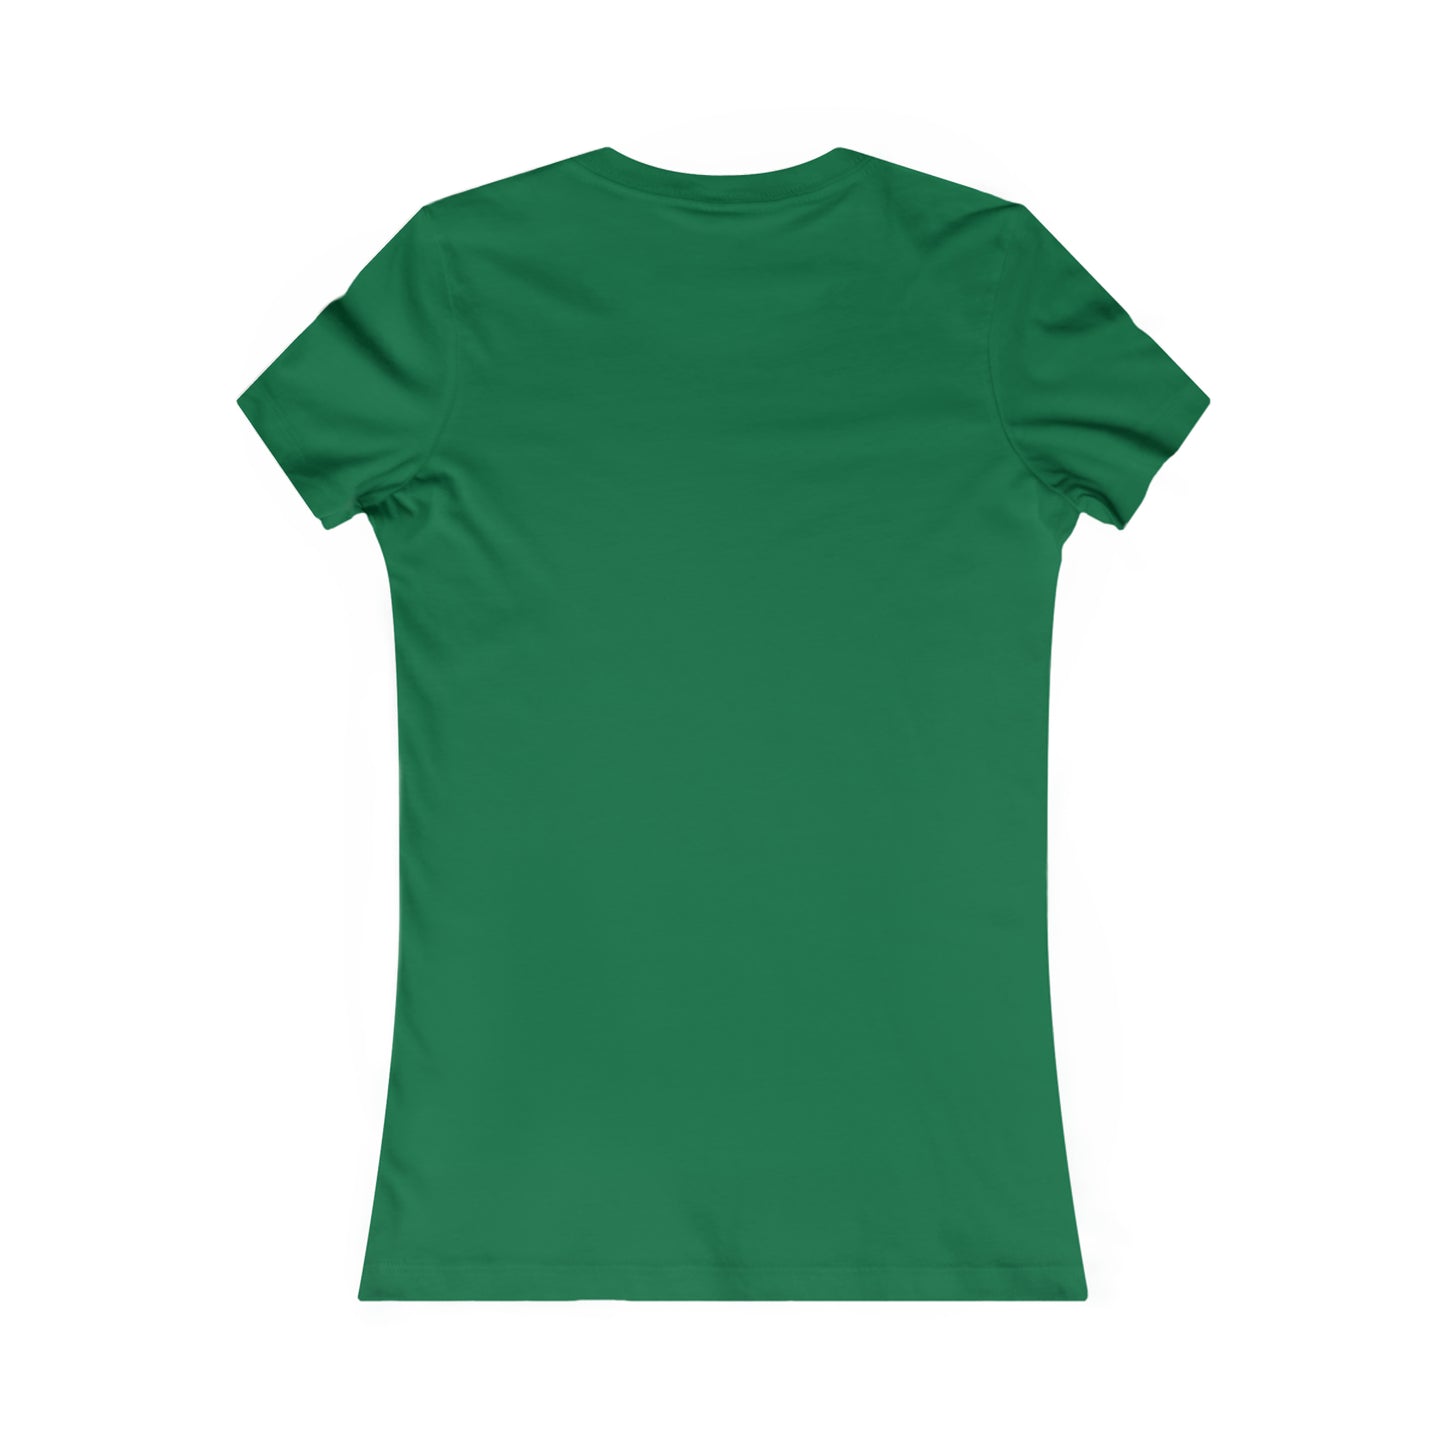 All Booked for Christmas - Women's Favorite Tee